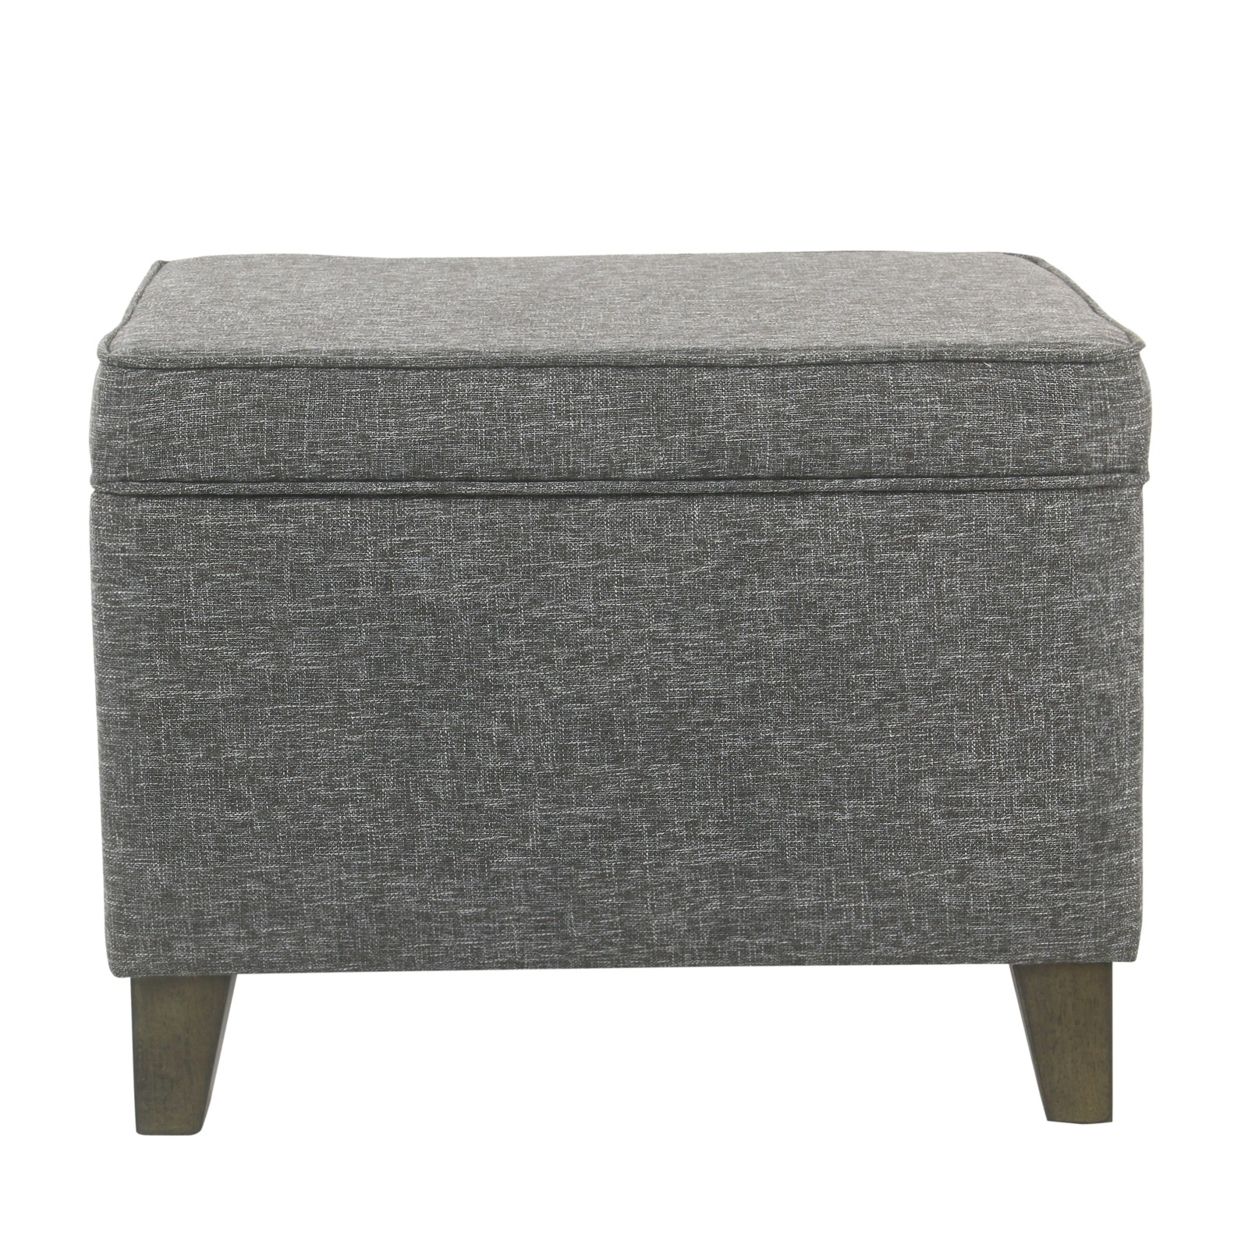 Buy Saltoro Sherpi Rectangular Fabric Upholstered Wooden Ottoman With Inside Gray And White Fabric Ottomans With Wooden Base (View 12 of 17)